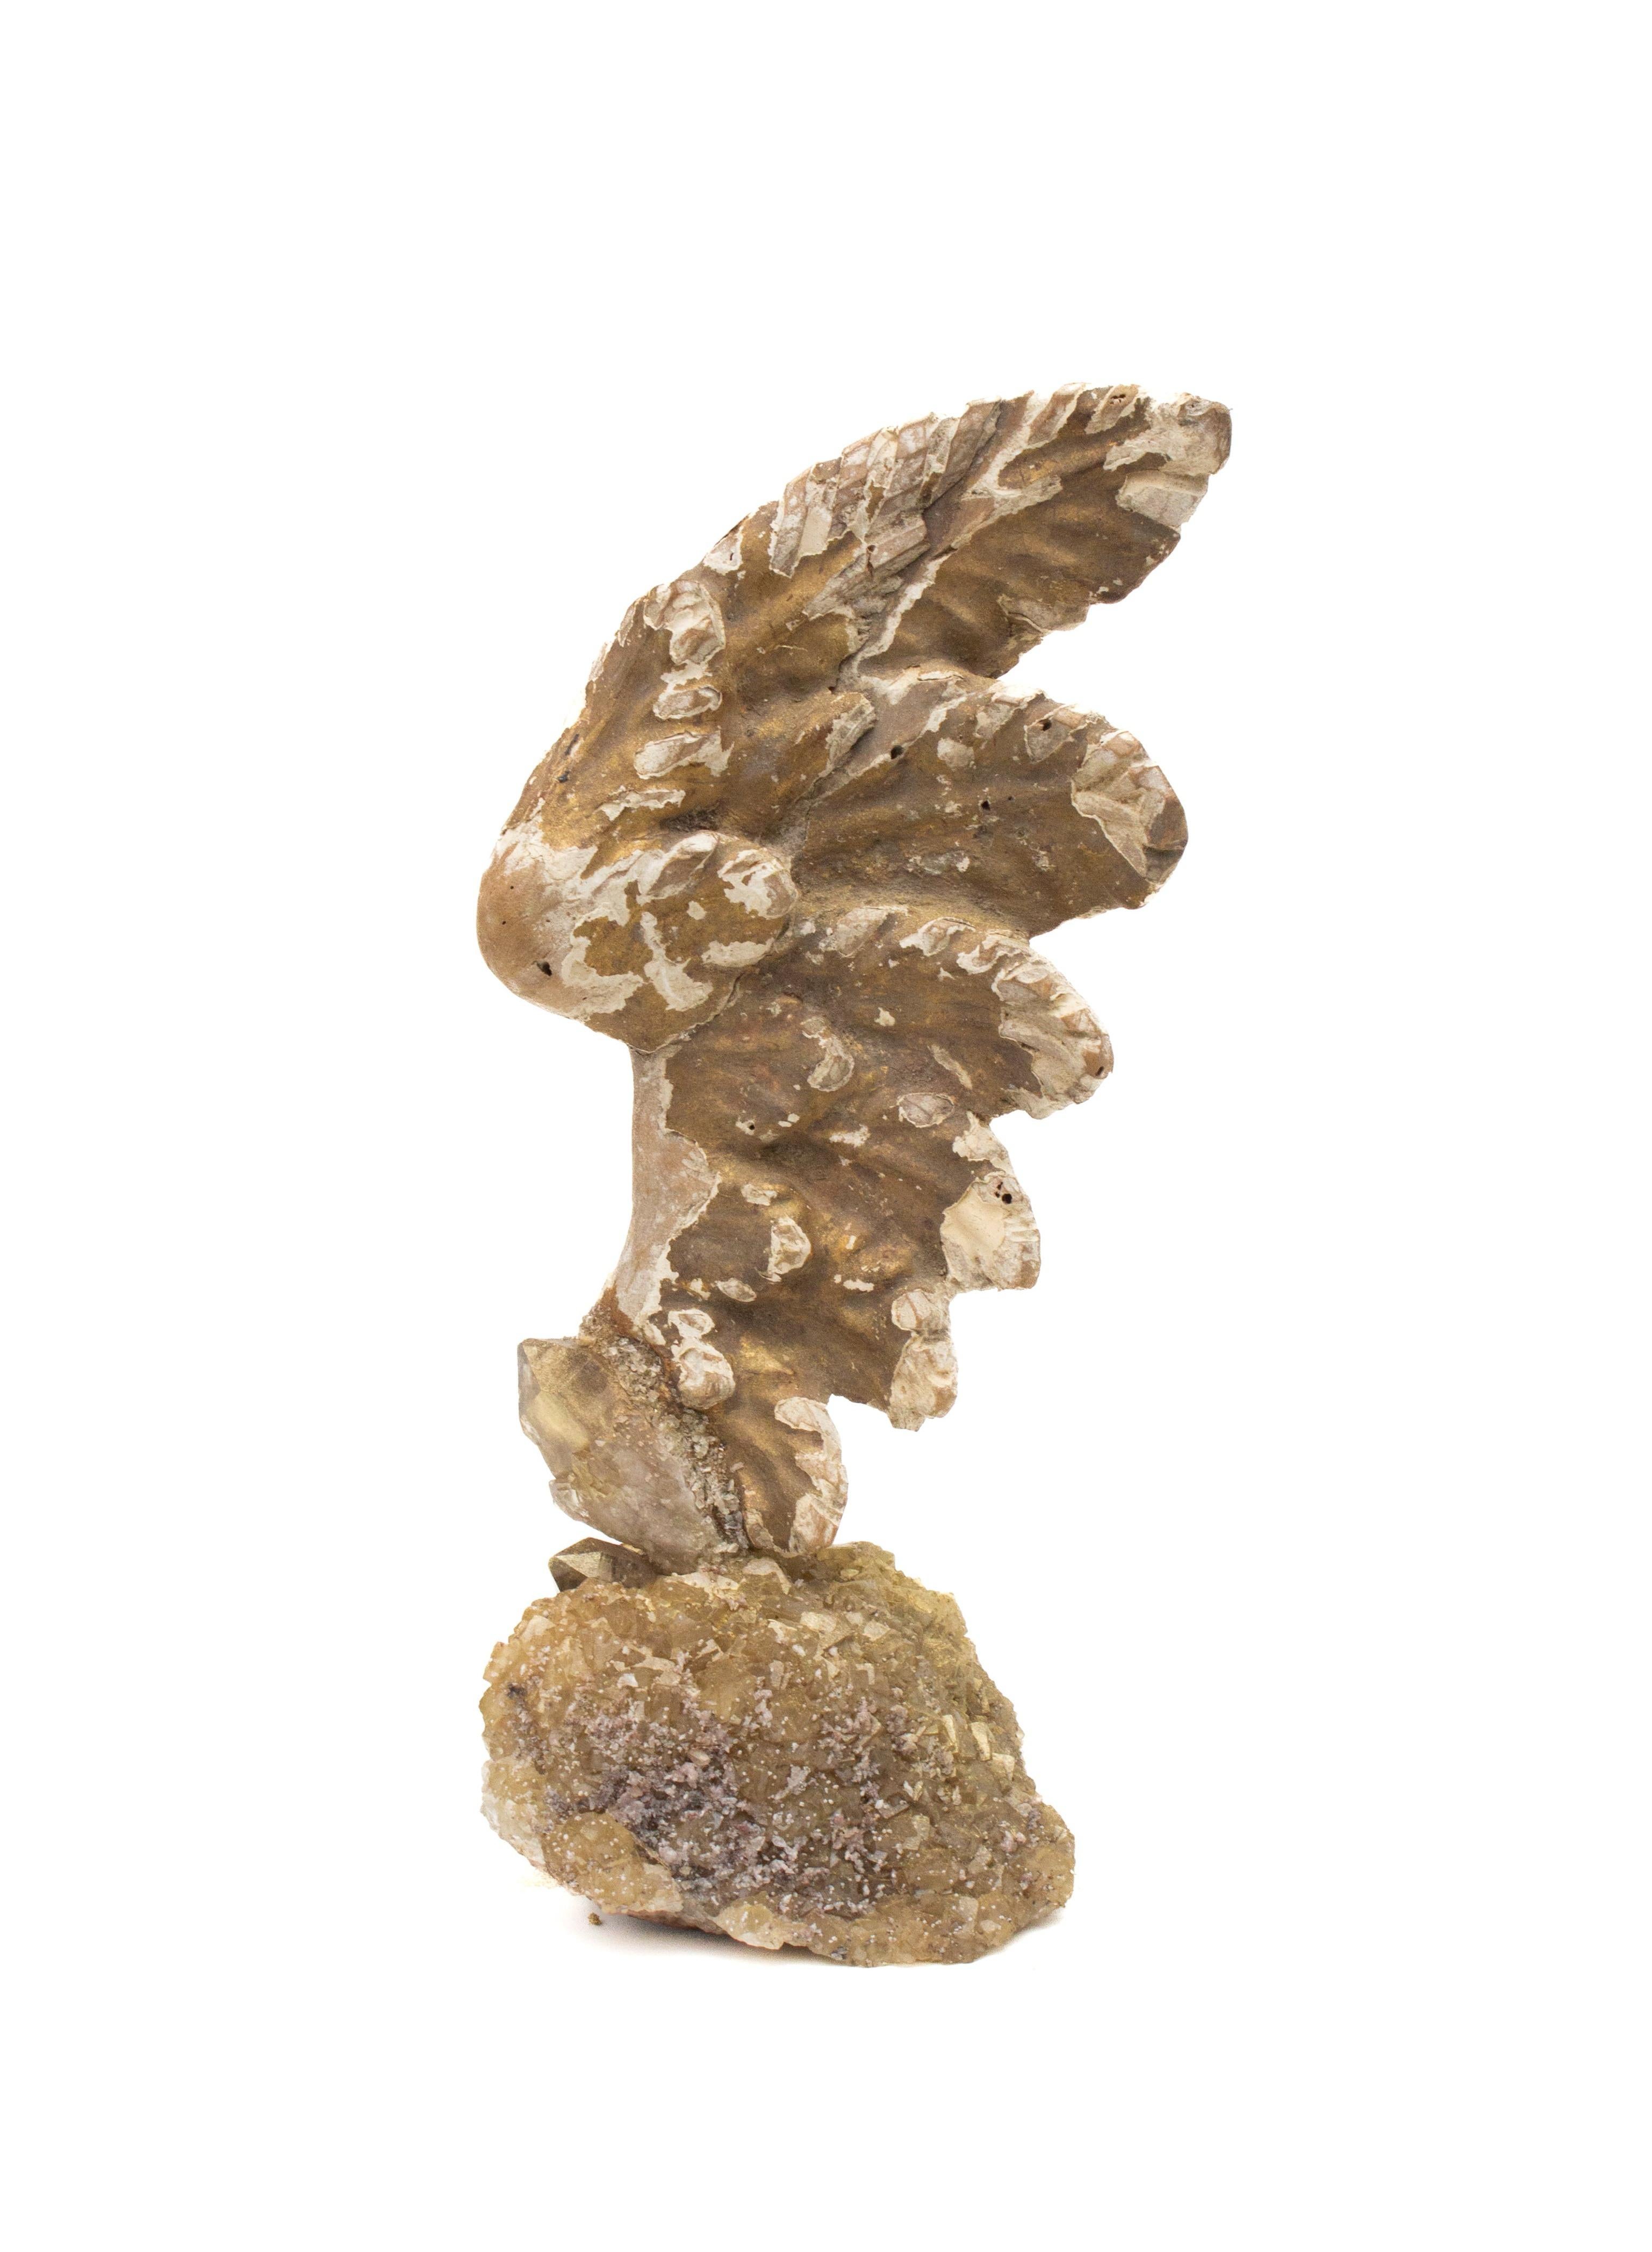 Sculptural 18th century Italian hand-carved angel wing mounted on a calcite crystal cluster and adorned with citrine points. The hand-carved angel wing was once part of a heavenly, angelic depiction in a historical church in Italy. 

The piece is